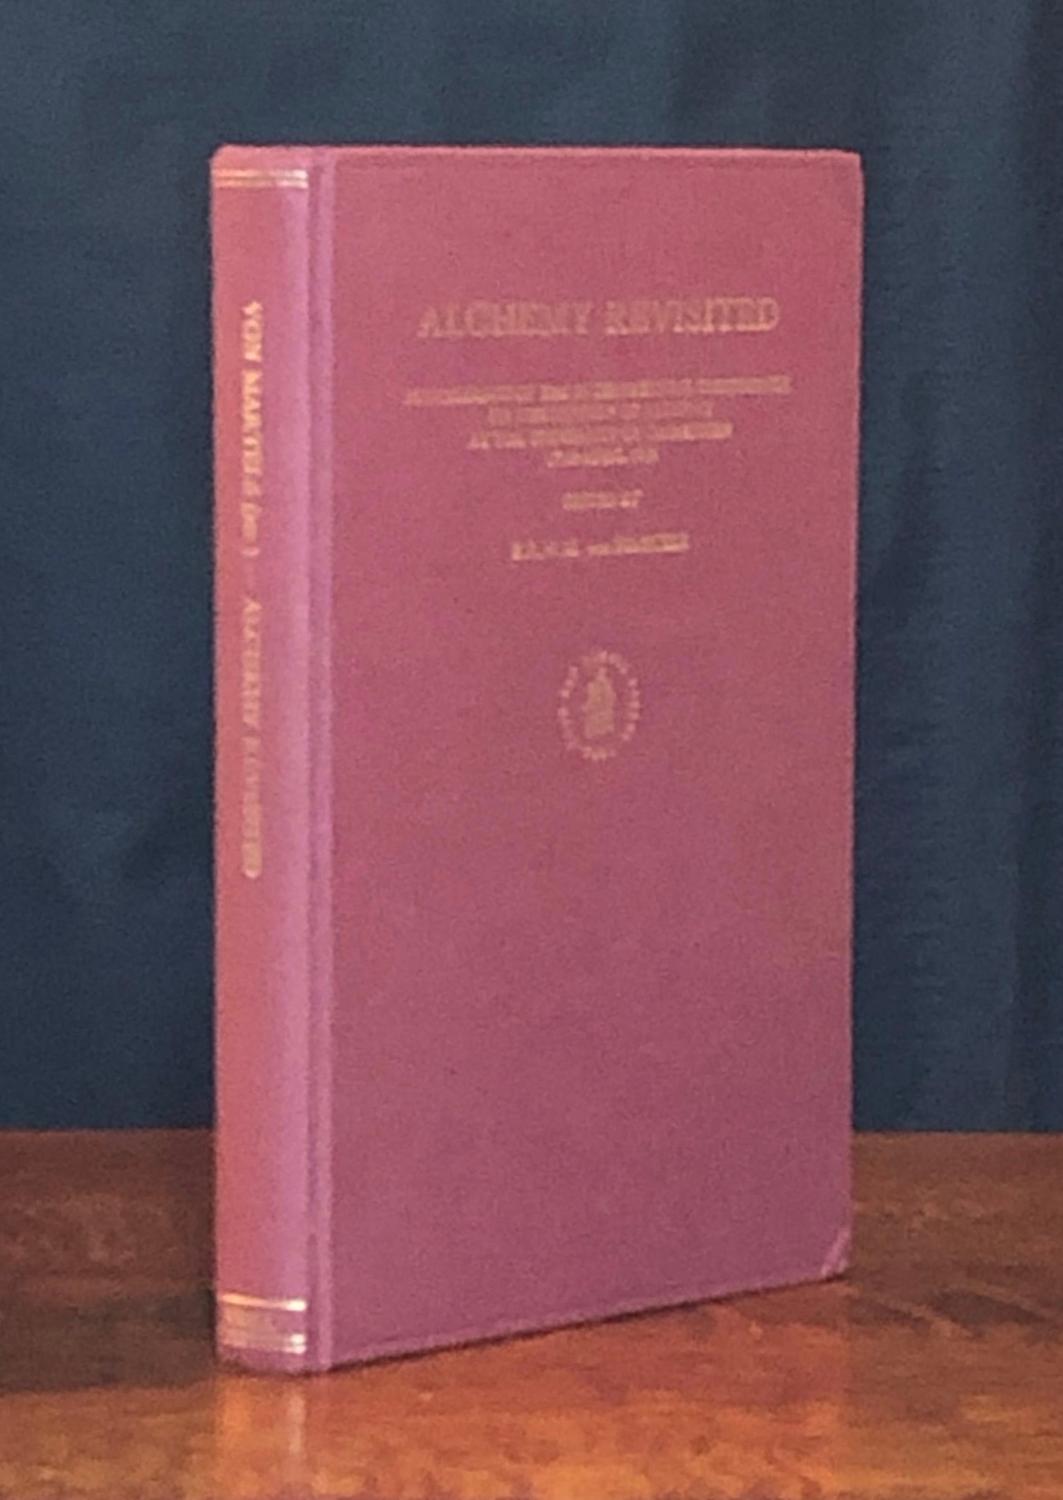 Alchemy Revisited: Proceedings of the International Conference on the History of Alchemy at the University of Groningen 17-19 April 1989 (Collection) - Z. R. W. M. Von Martels